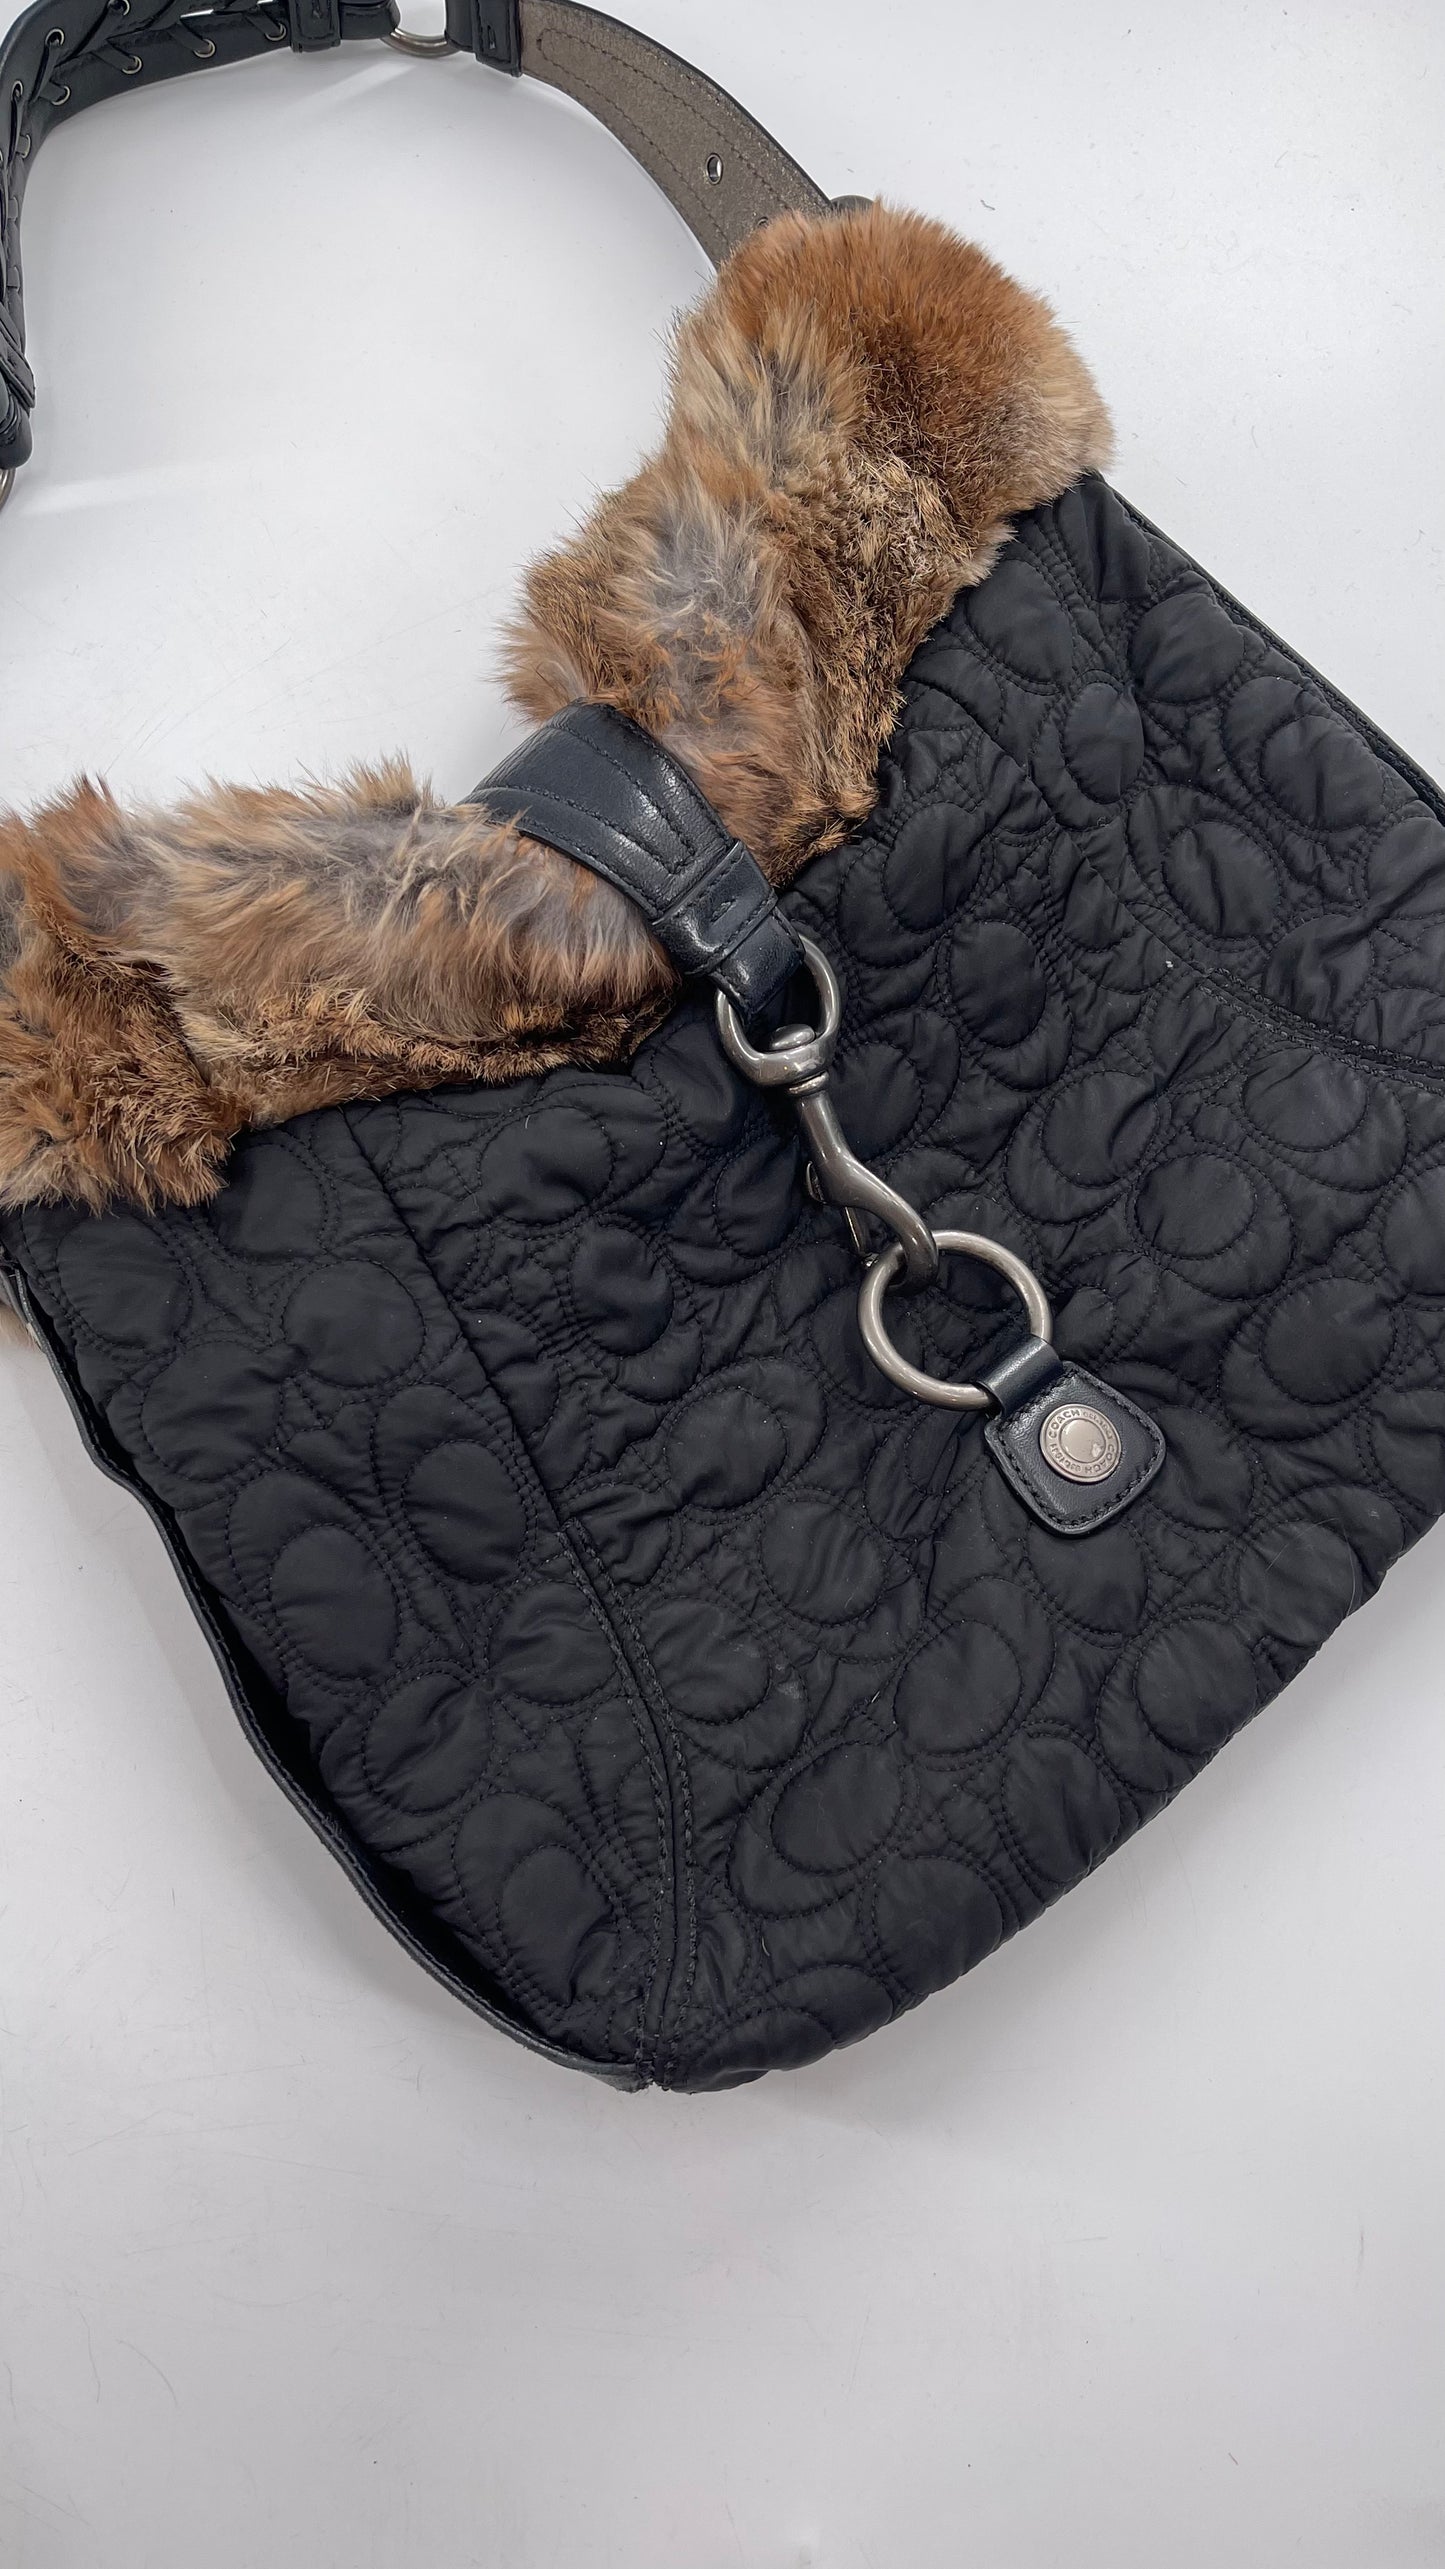 Coach Vintage Fur Trim Bag with Quilted Logo Pattern